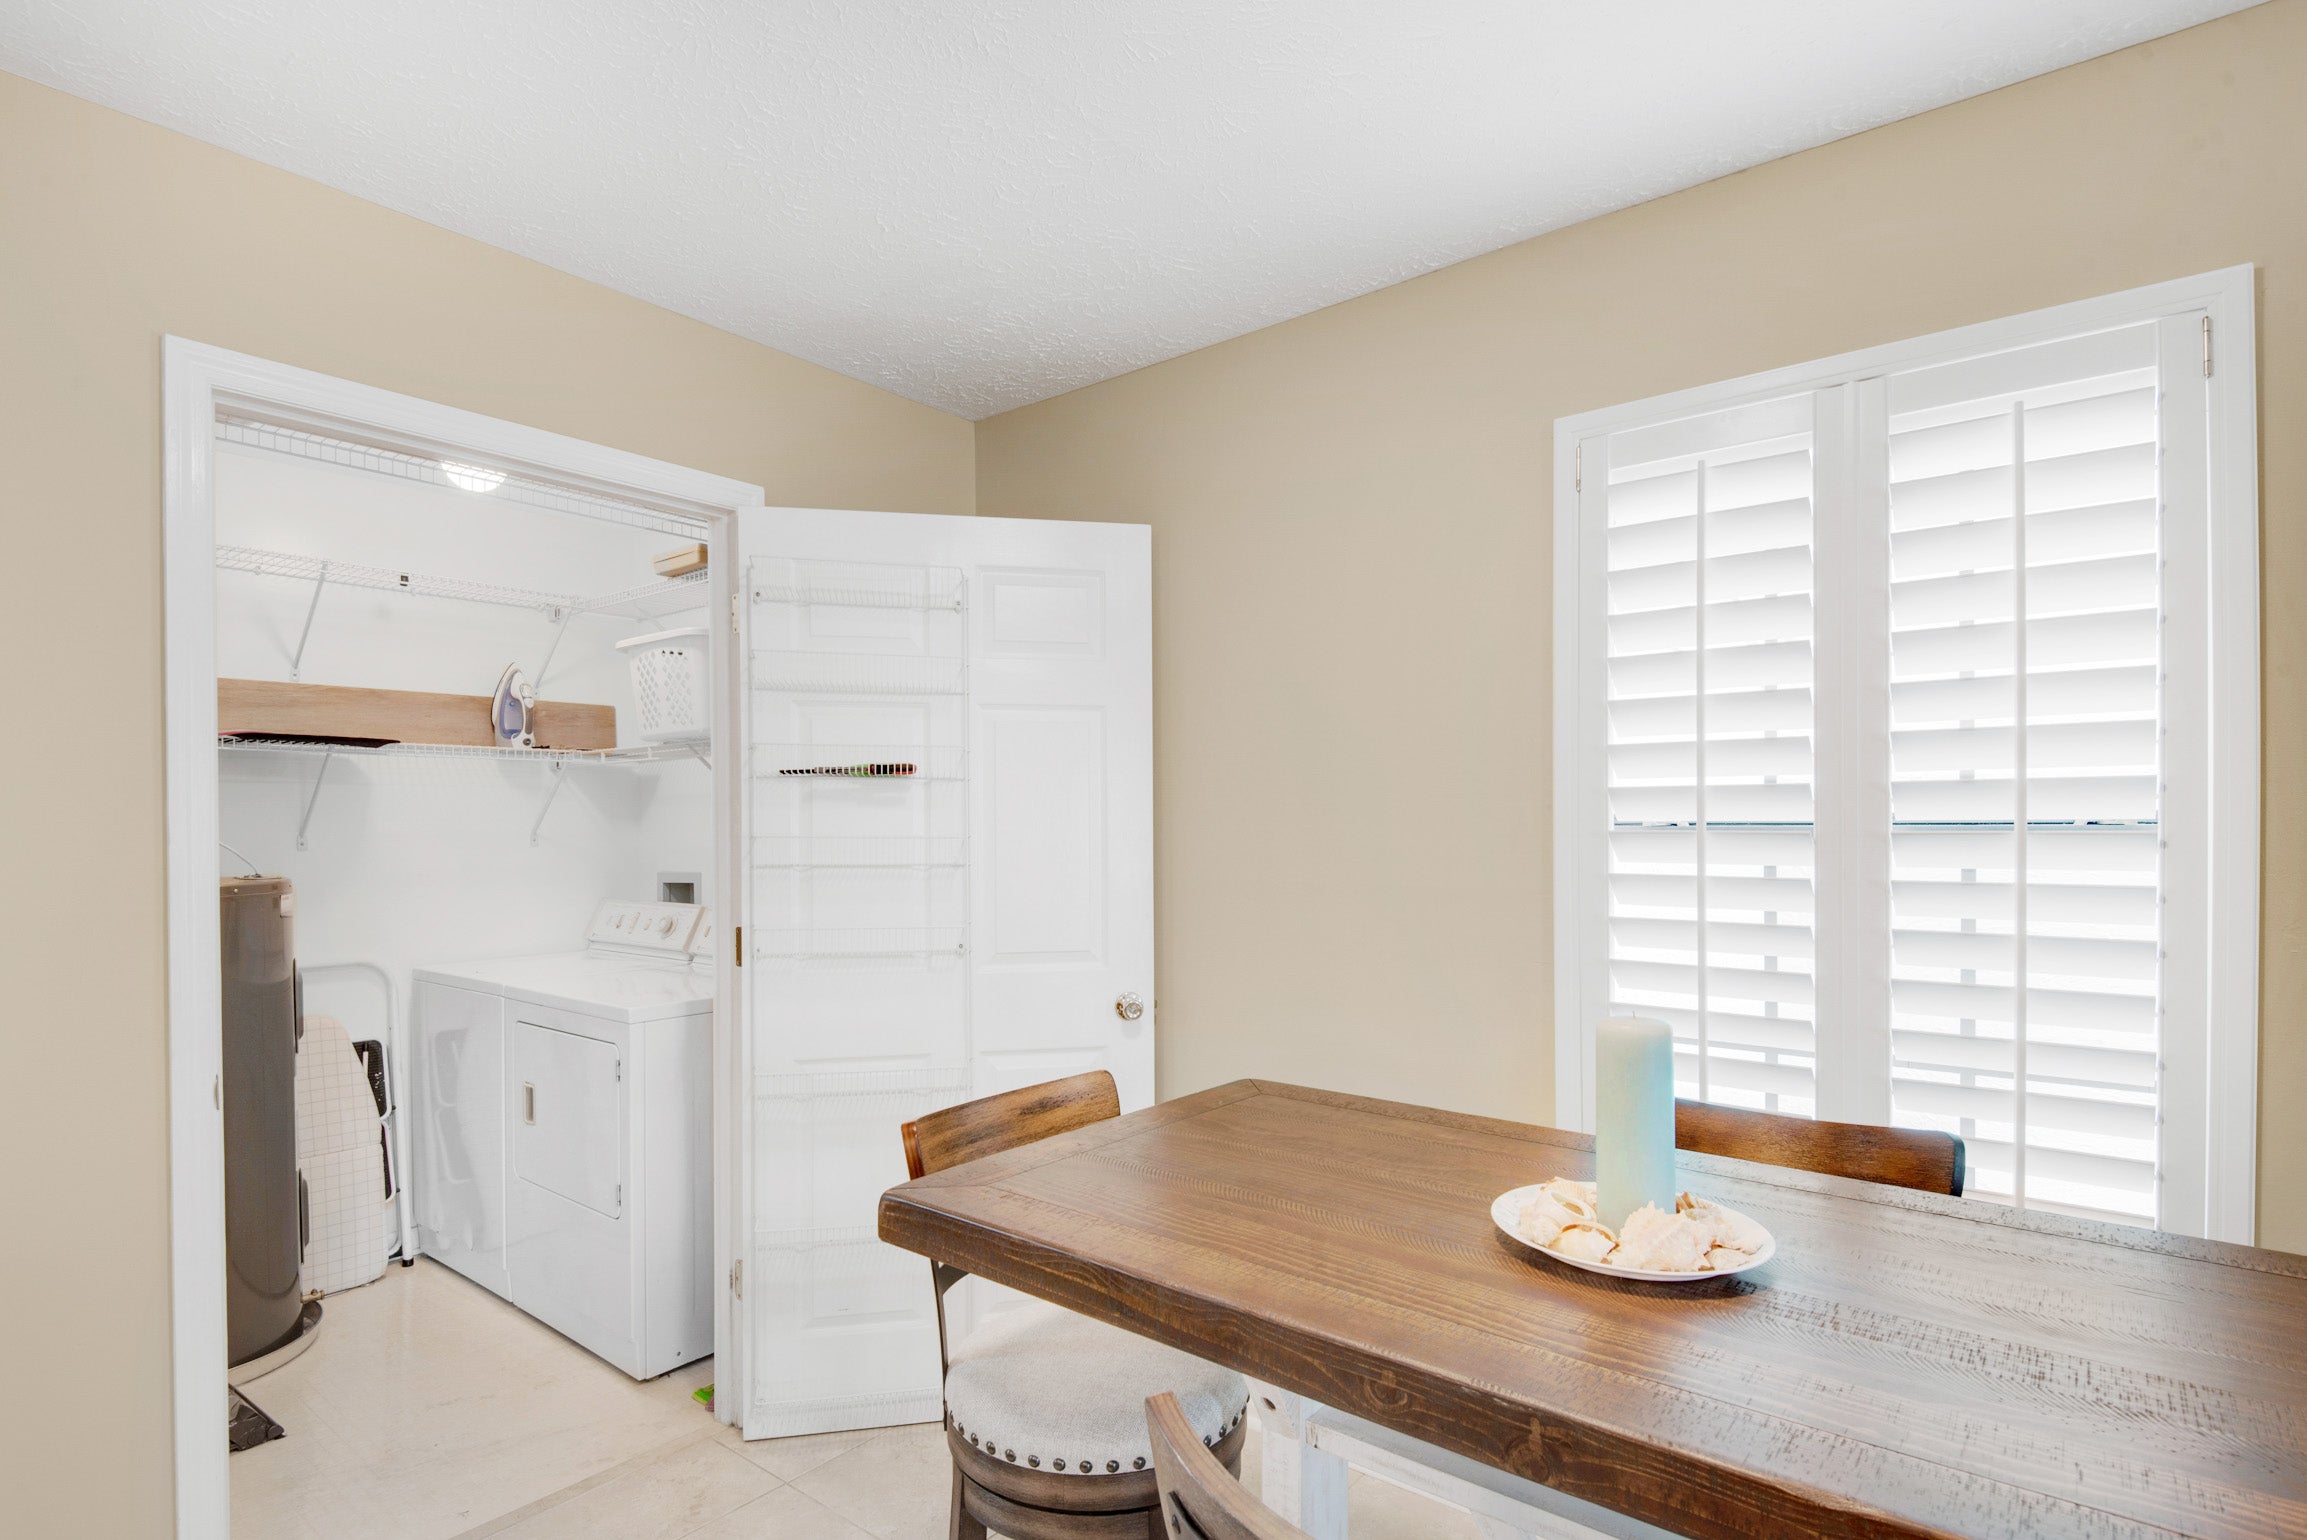 Dining+to+laundry+room